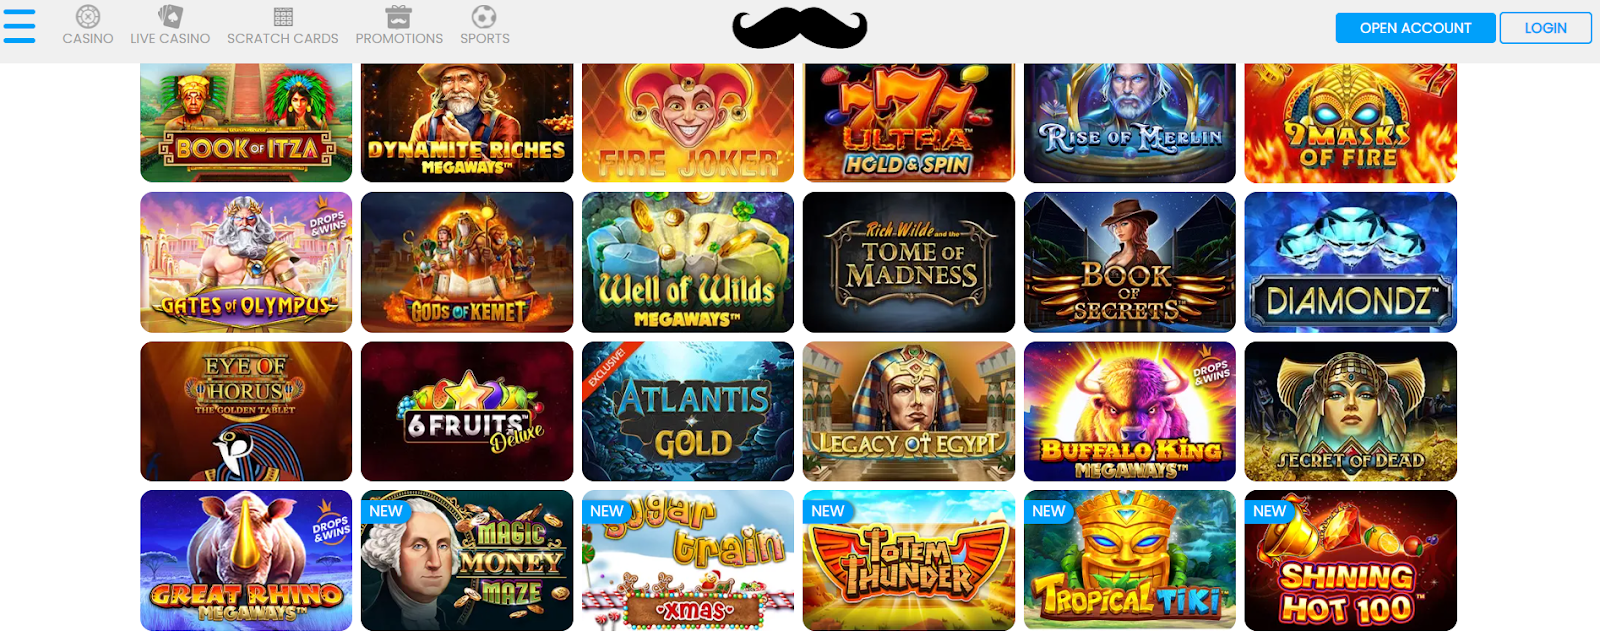 mr.play Casino has one of the best casino apps